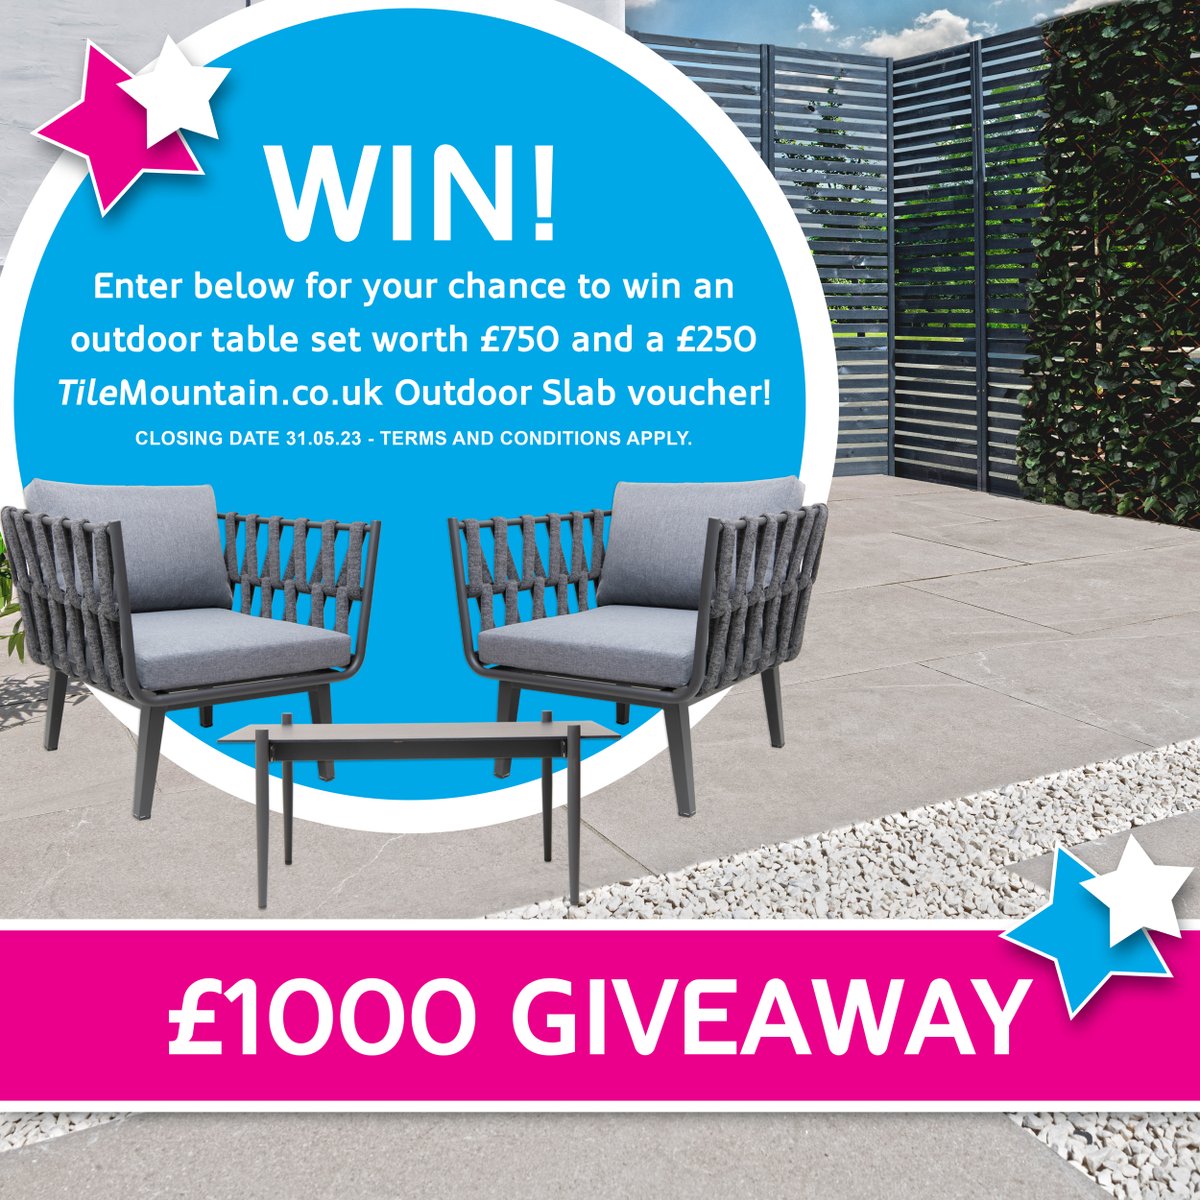 GIVEAWAY TIME 🌞 We're giving you the chance to win the ultimate garden makeover with £750 of outdoor furniture & £250 to spend on our huge collection of outdoor tiles! All you need to do is:
1. Follow us 
2. Tag a friend 
3. Retweet this tweet 

#win #contest #enter #Giveaway